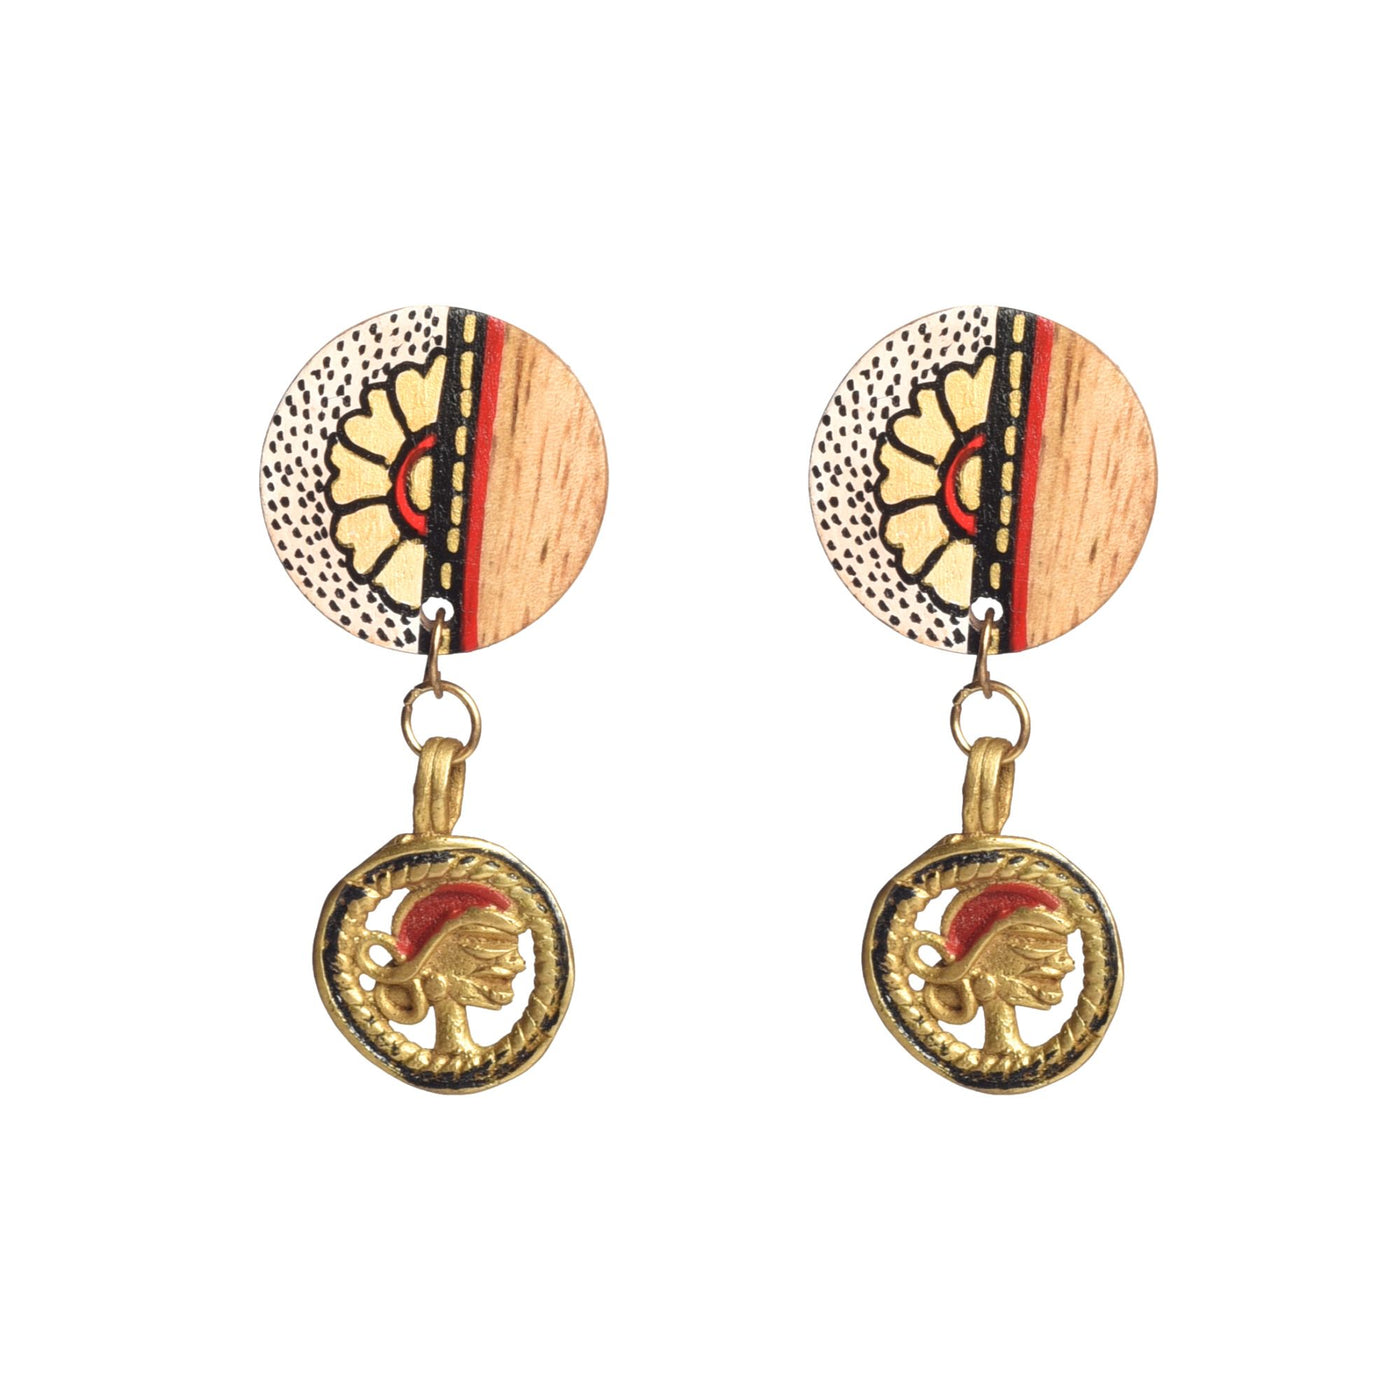 The Star Handcrafted Tribal Earrings - Fashion & Lifestyle - 4